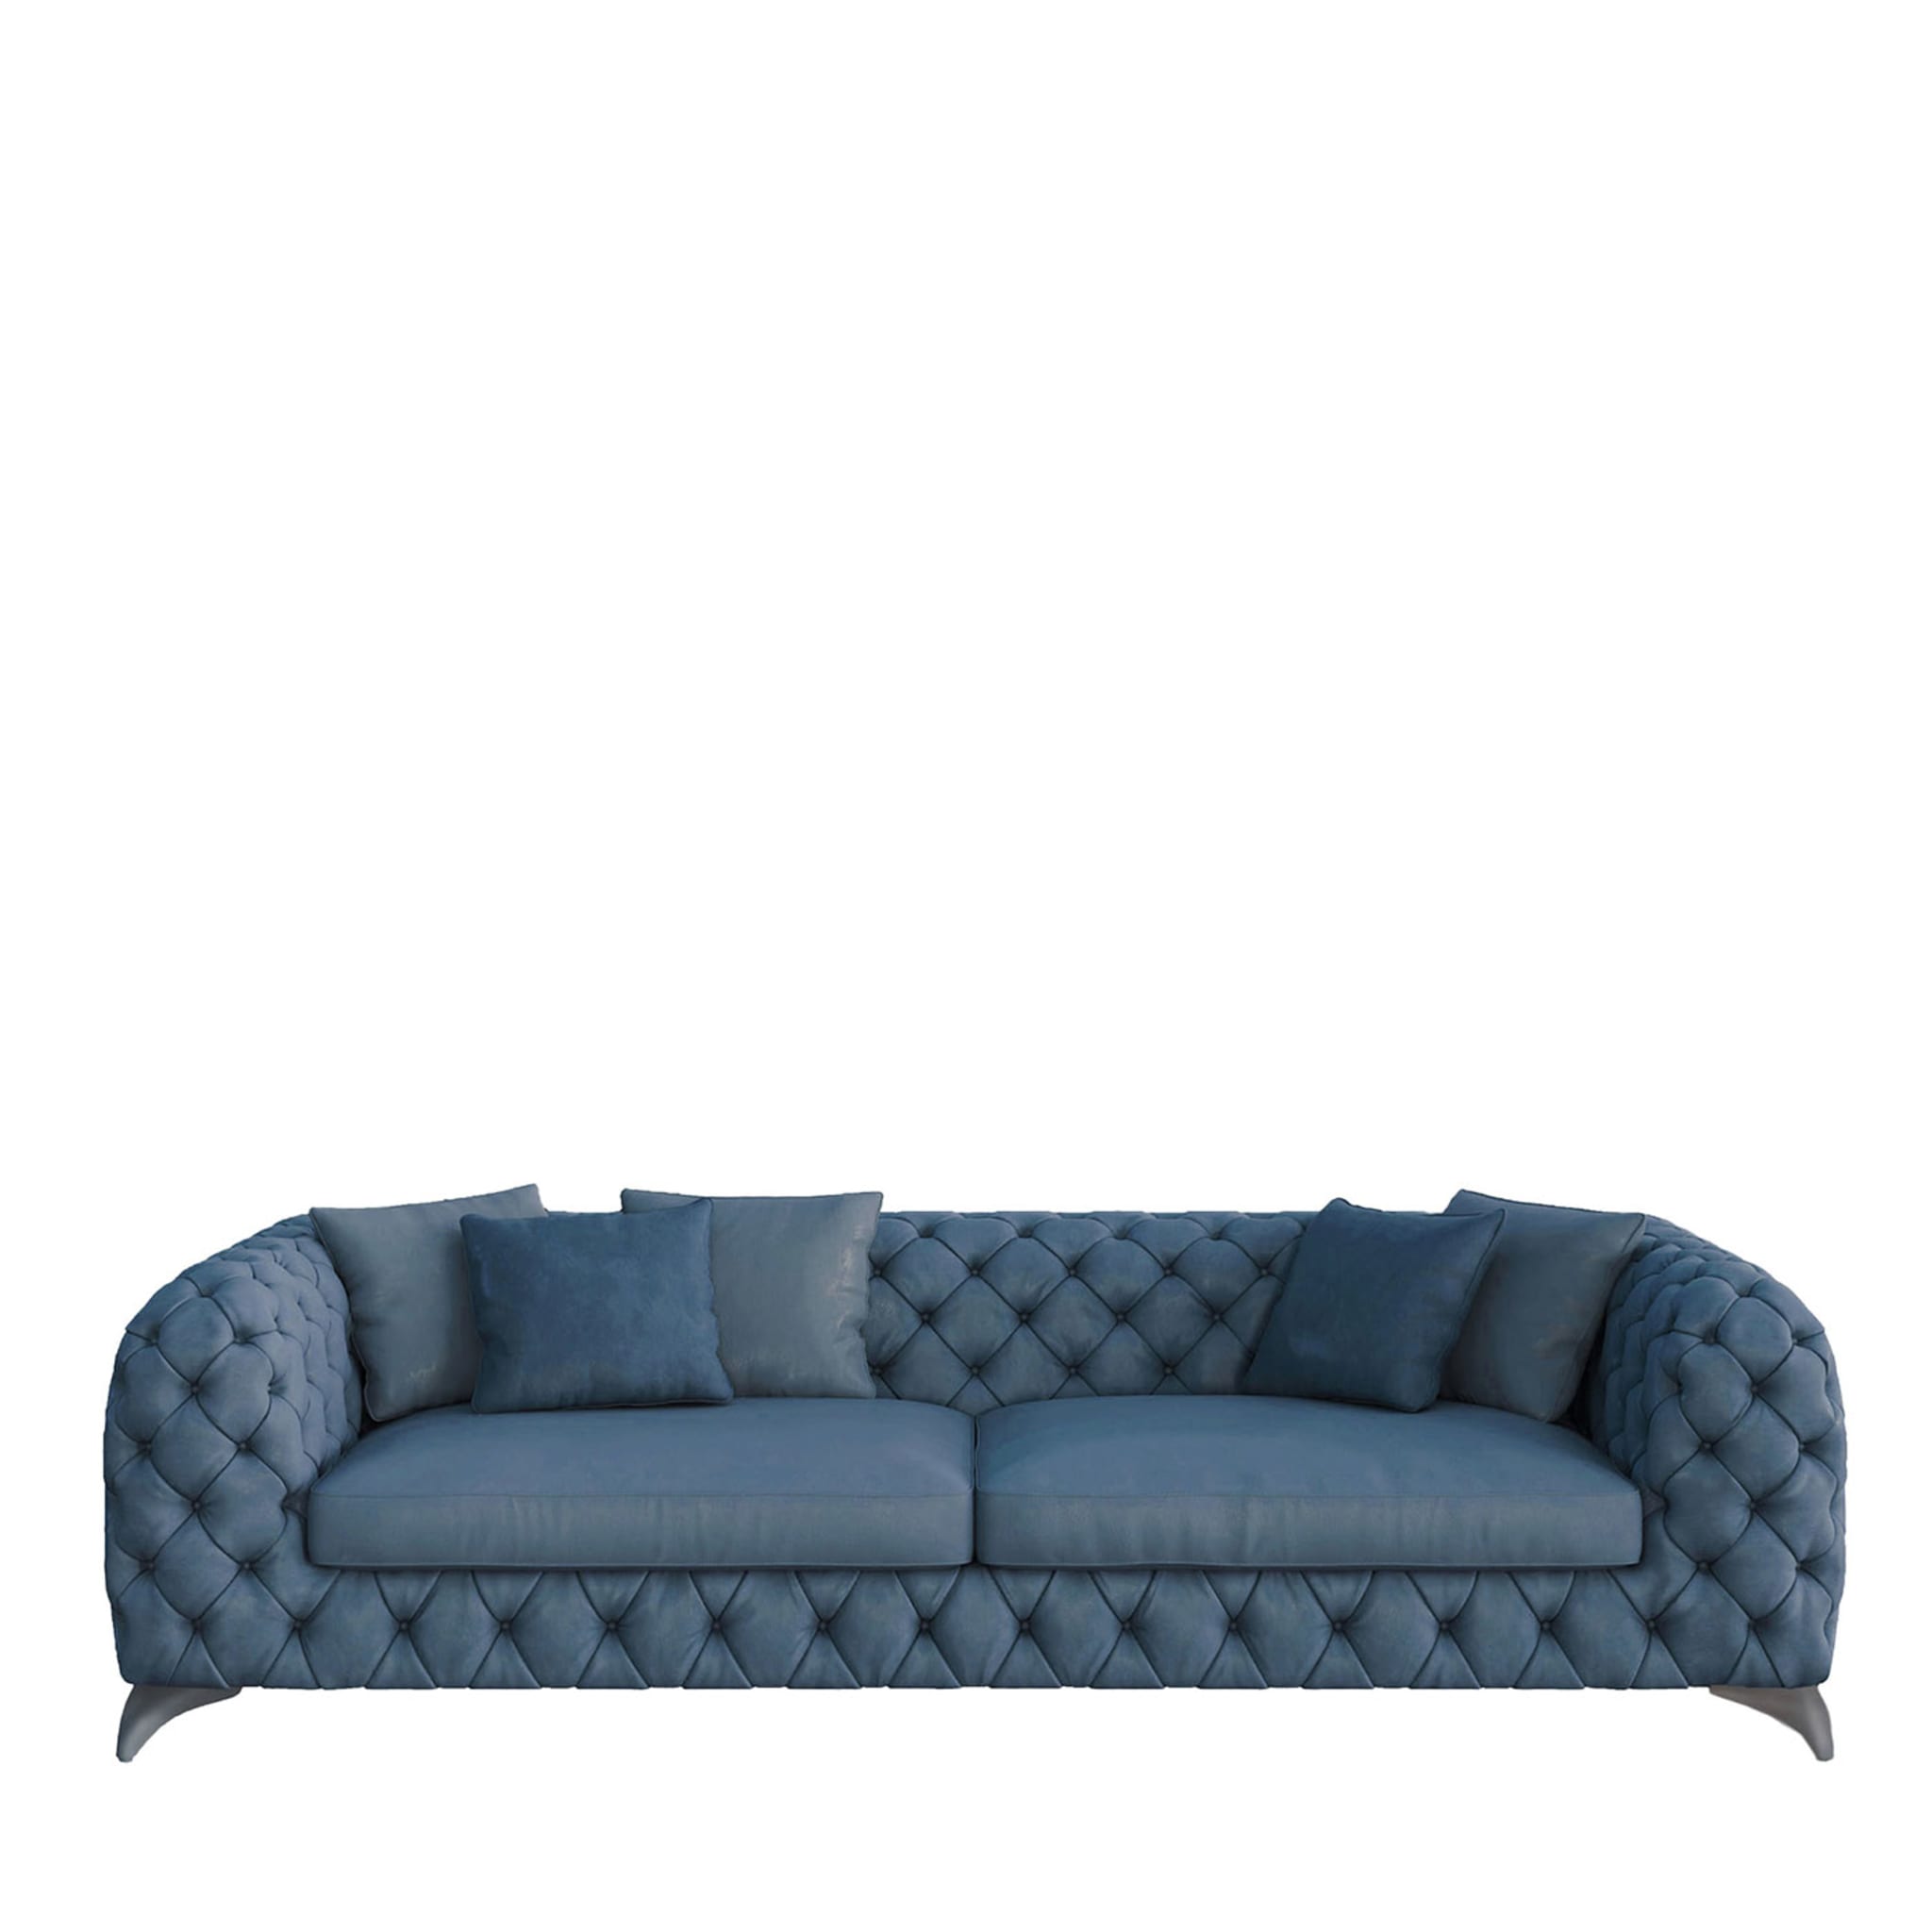 Isidoro Leather Sofa 3 Seats by Marco and Giulio Mantellassi - Main view